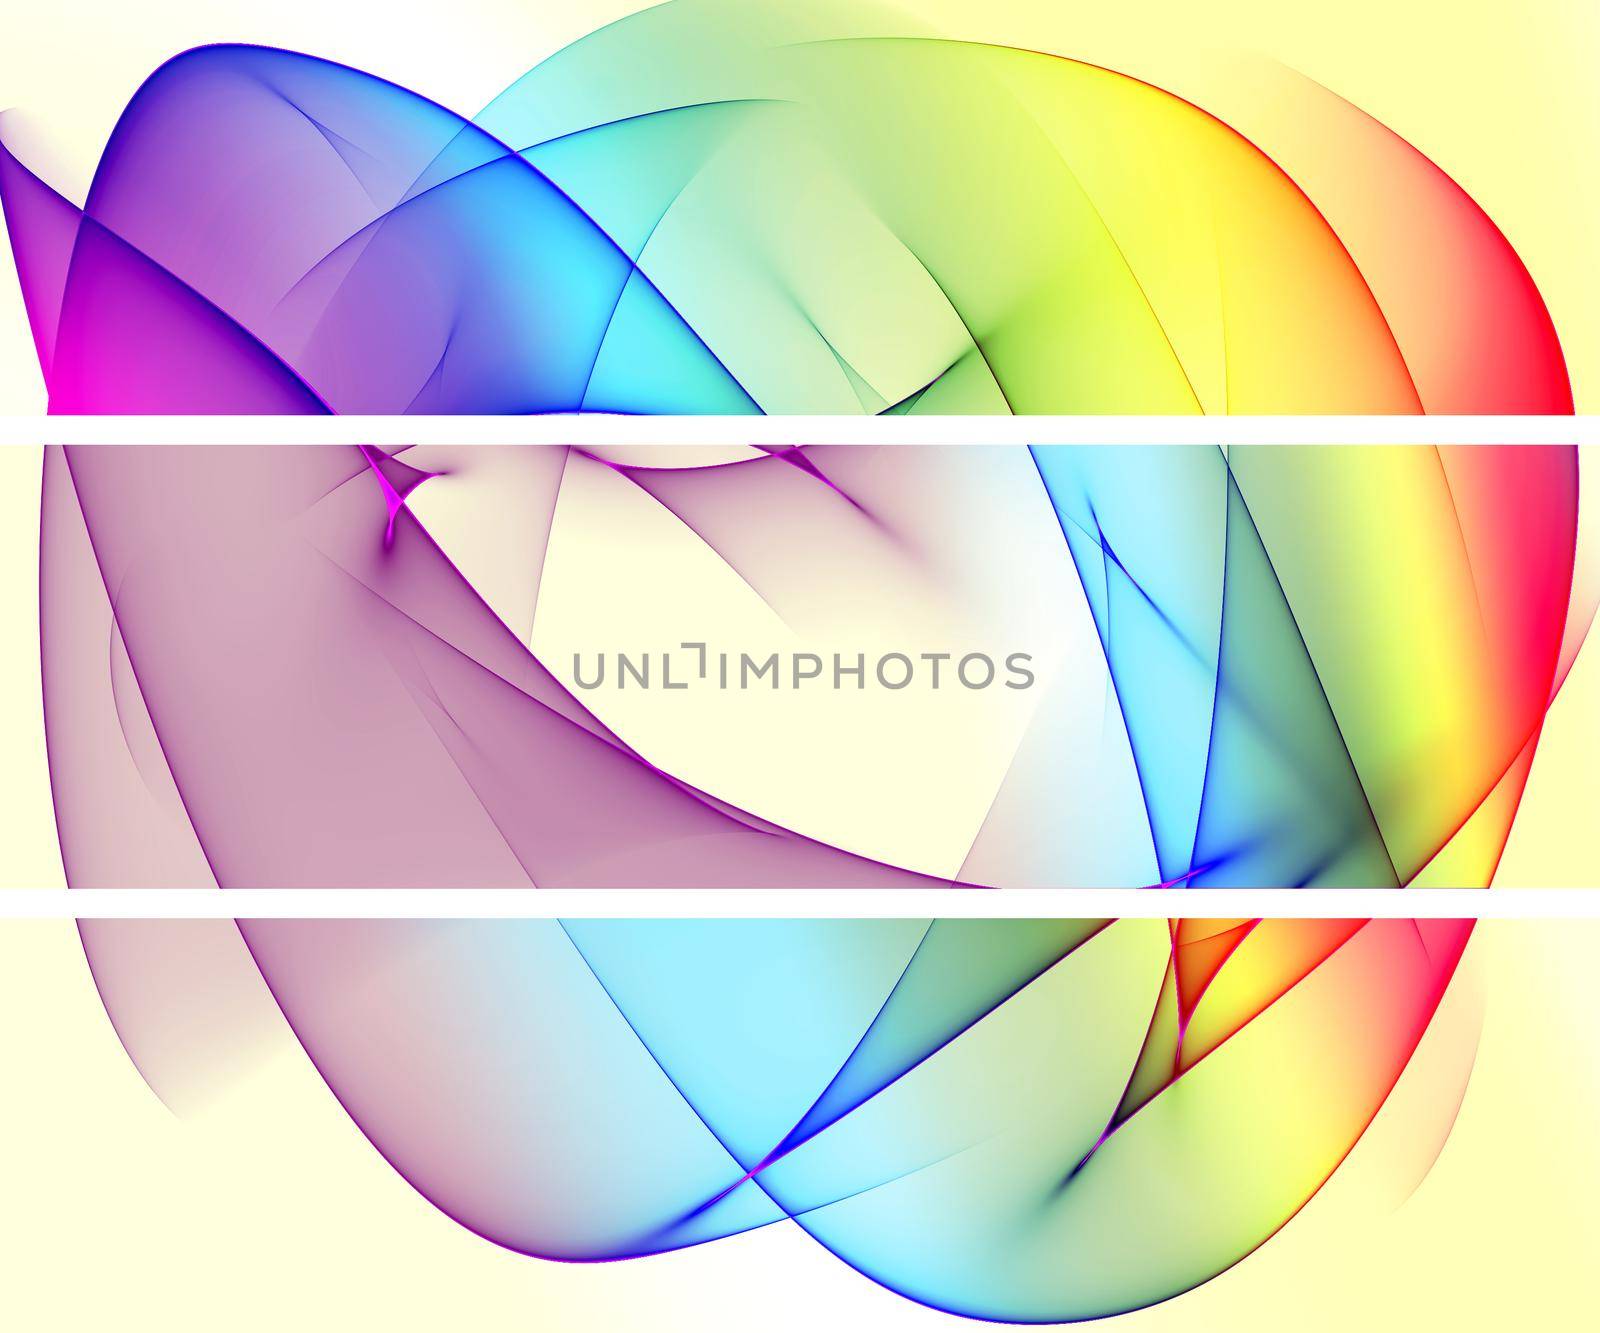 3D illustration of colorful banner set with blended abstract curve shapes for creative art and web design purposes